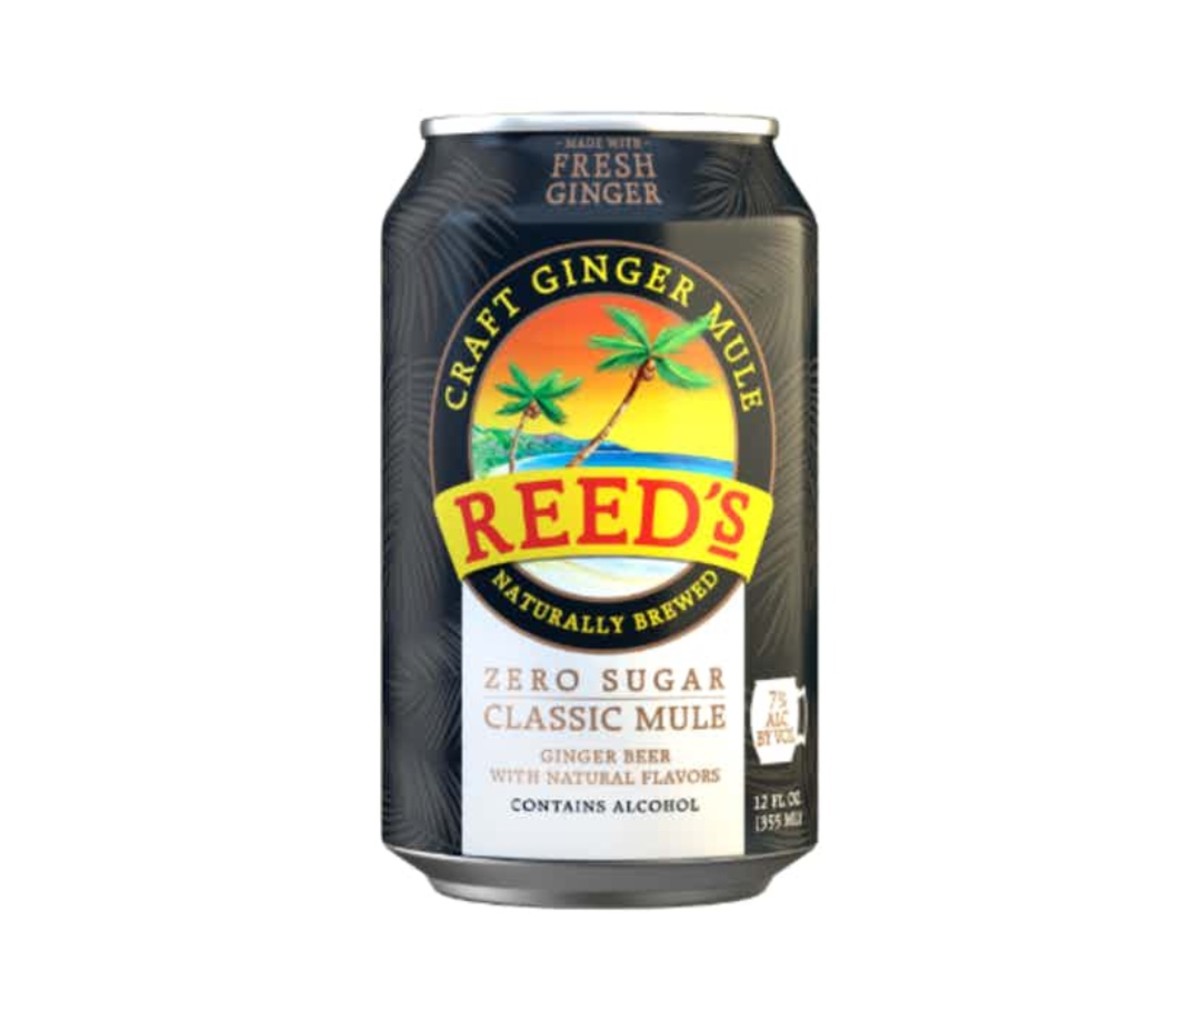 Reed's Zero Sugar Moscow Mule is one of the summer's best canned cocktails.